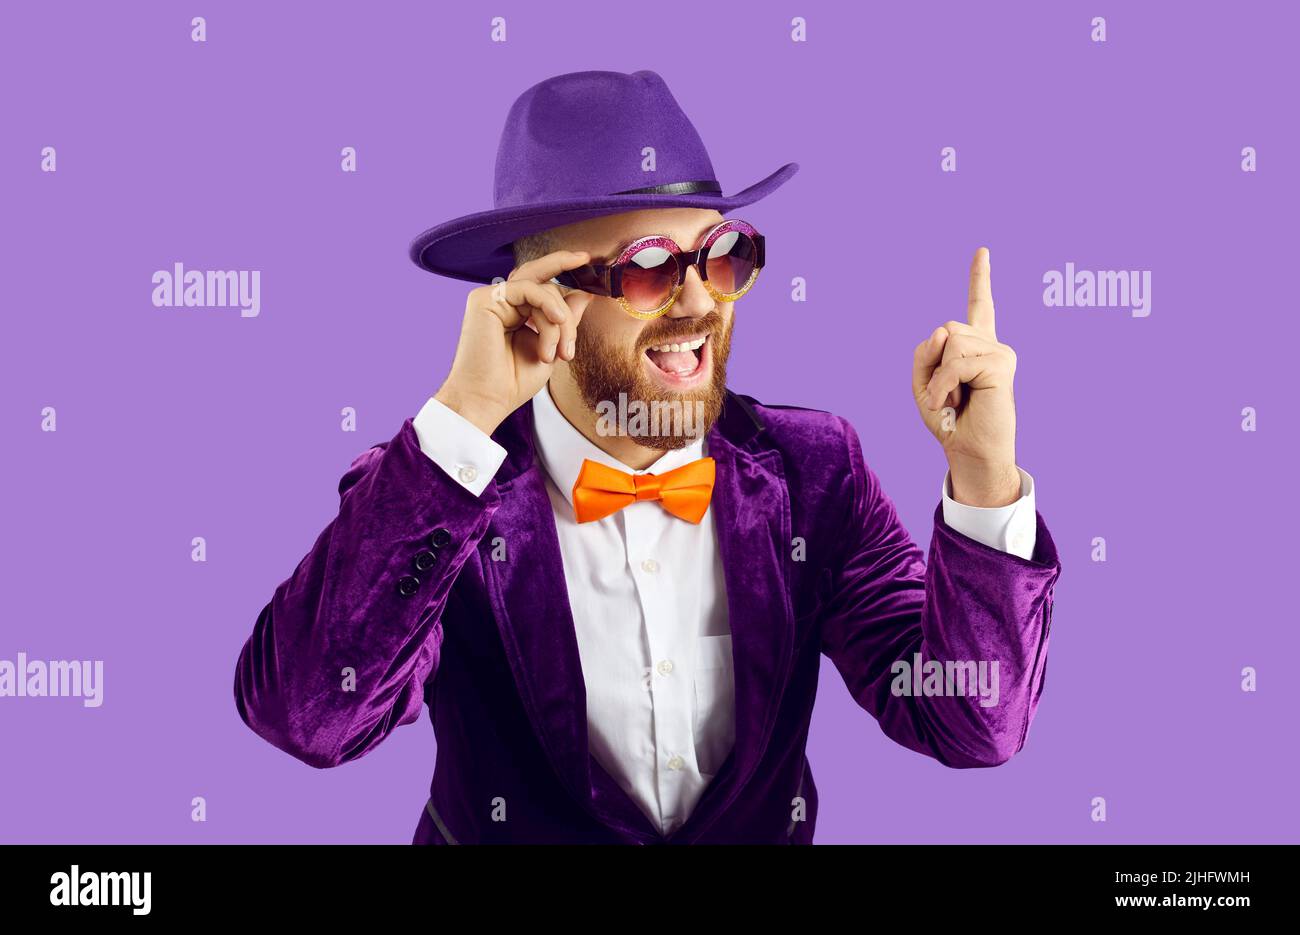 Smiling male performer in suit point at deal offer Stock Photo